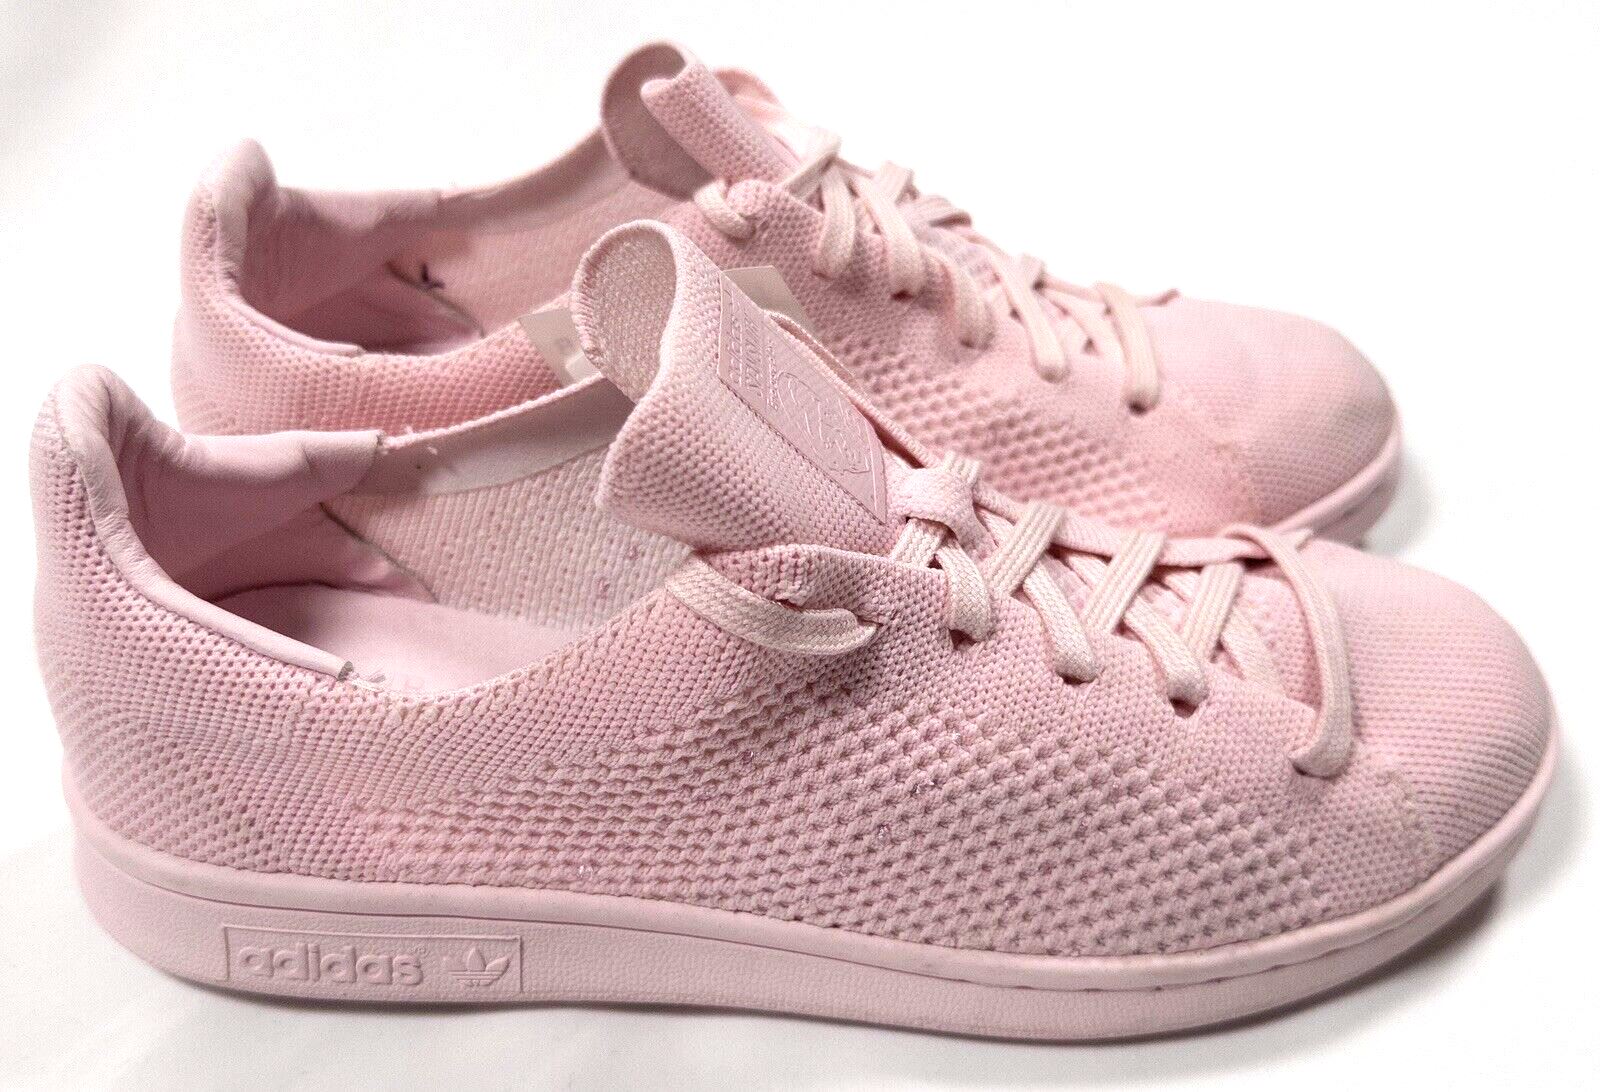 Limited Edition Adidas Stan Smith Pink Women Trainer Shoe Size UK 6